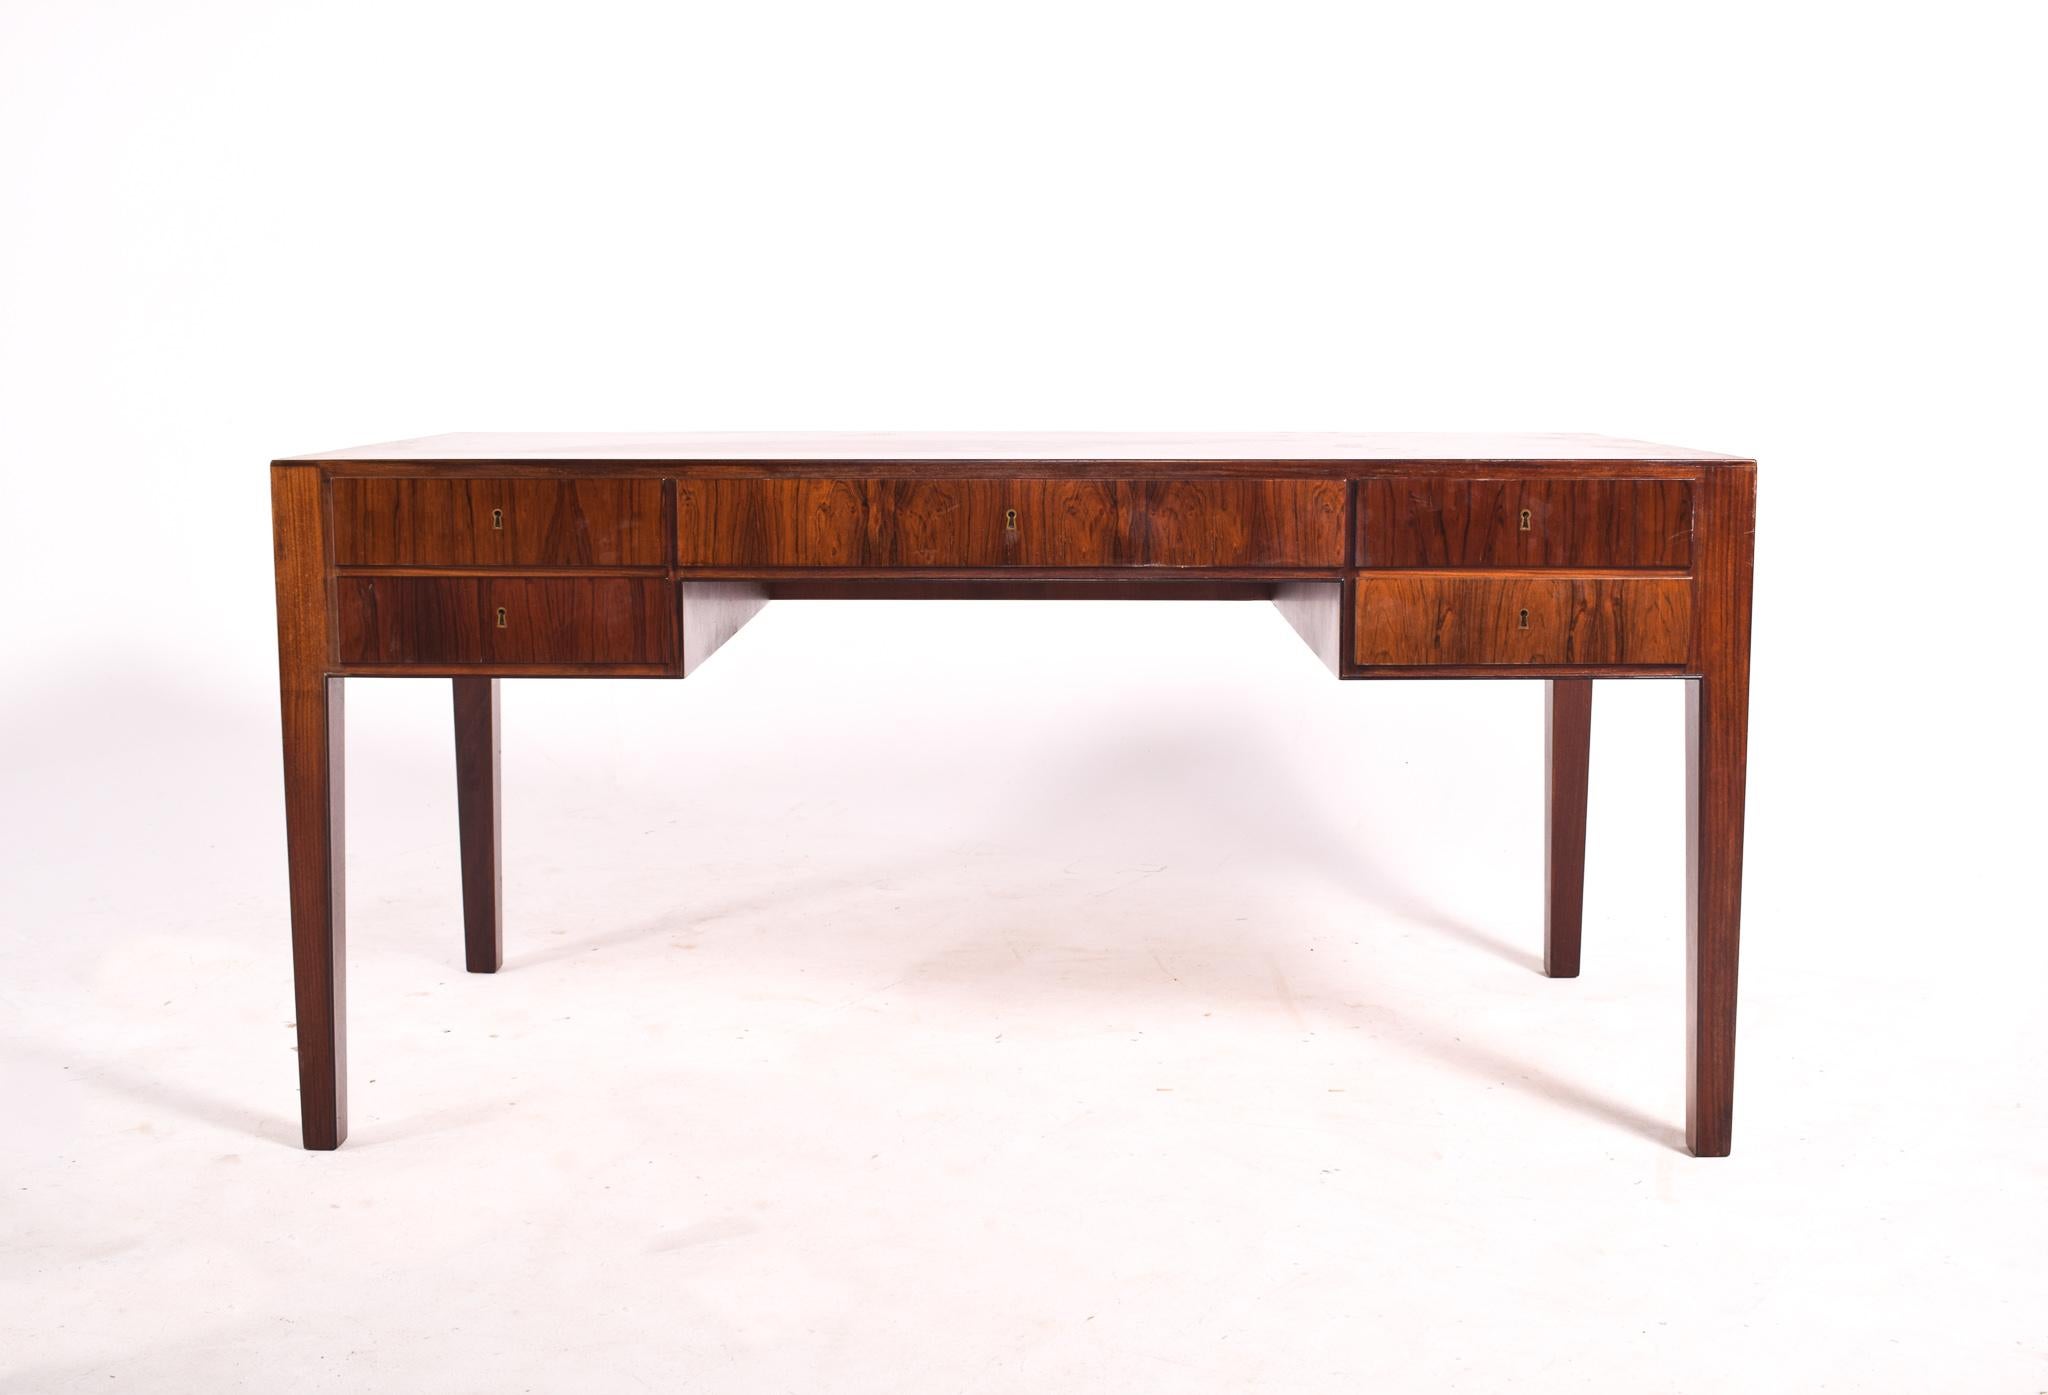 Very elegant writing desk by Ole Wanscher, 1950. This rosewood veneer writing desk is very nice with typical Danish refined details all over. This rosewood desk was manufactured by A.J. Iversen during the 1950s. It has five elegant drawers plus a